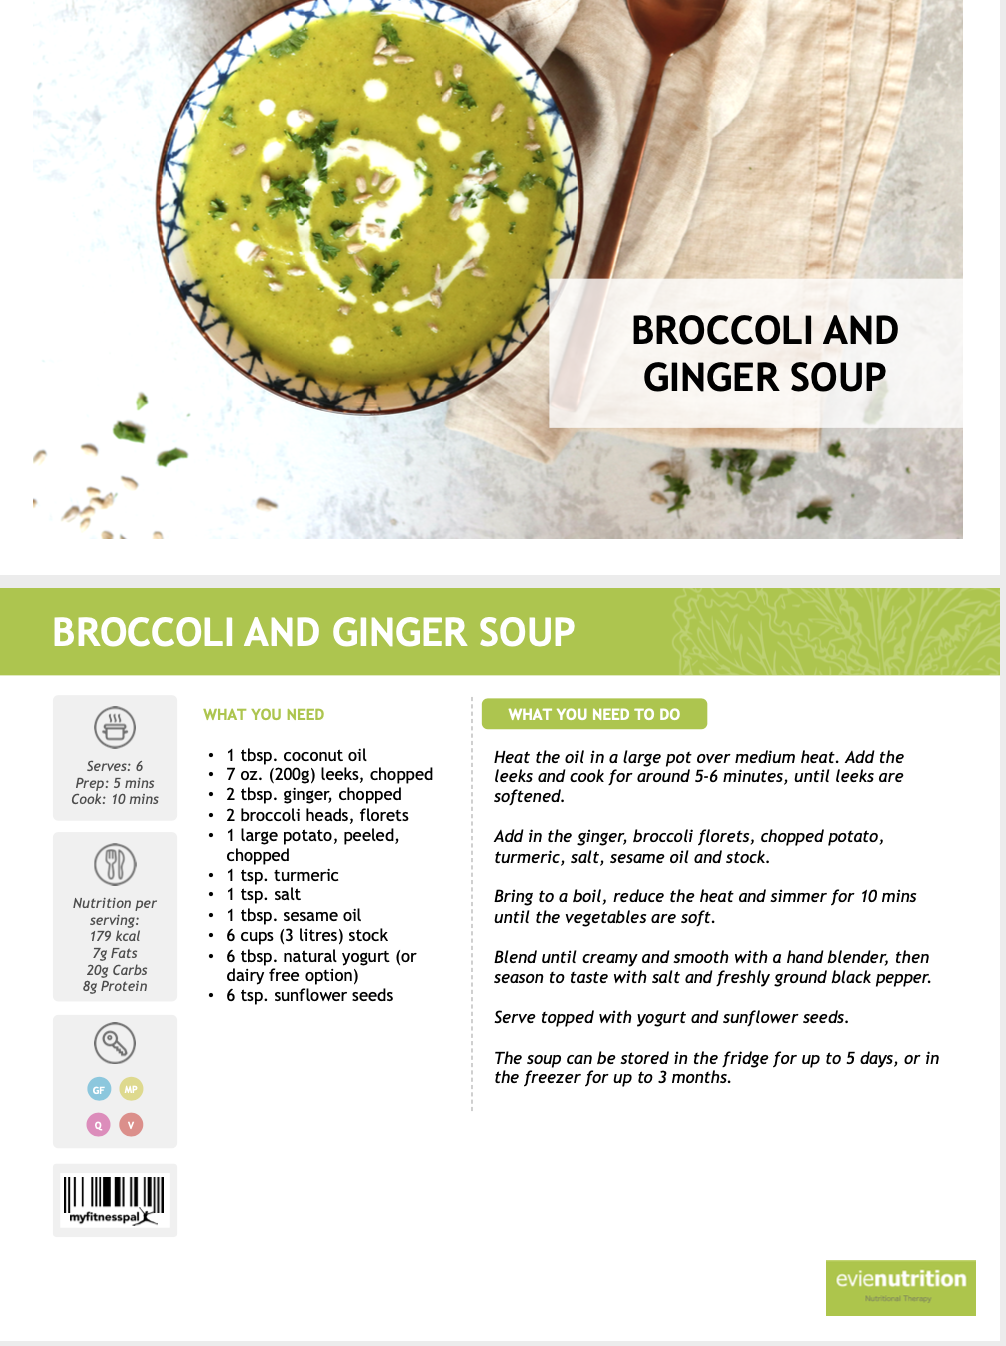 Broccoli and ginger soup